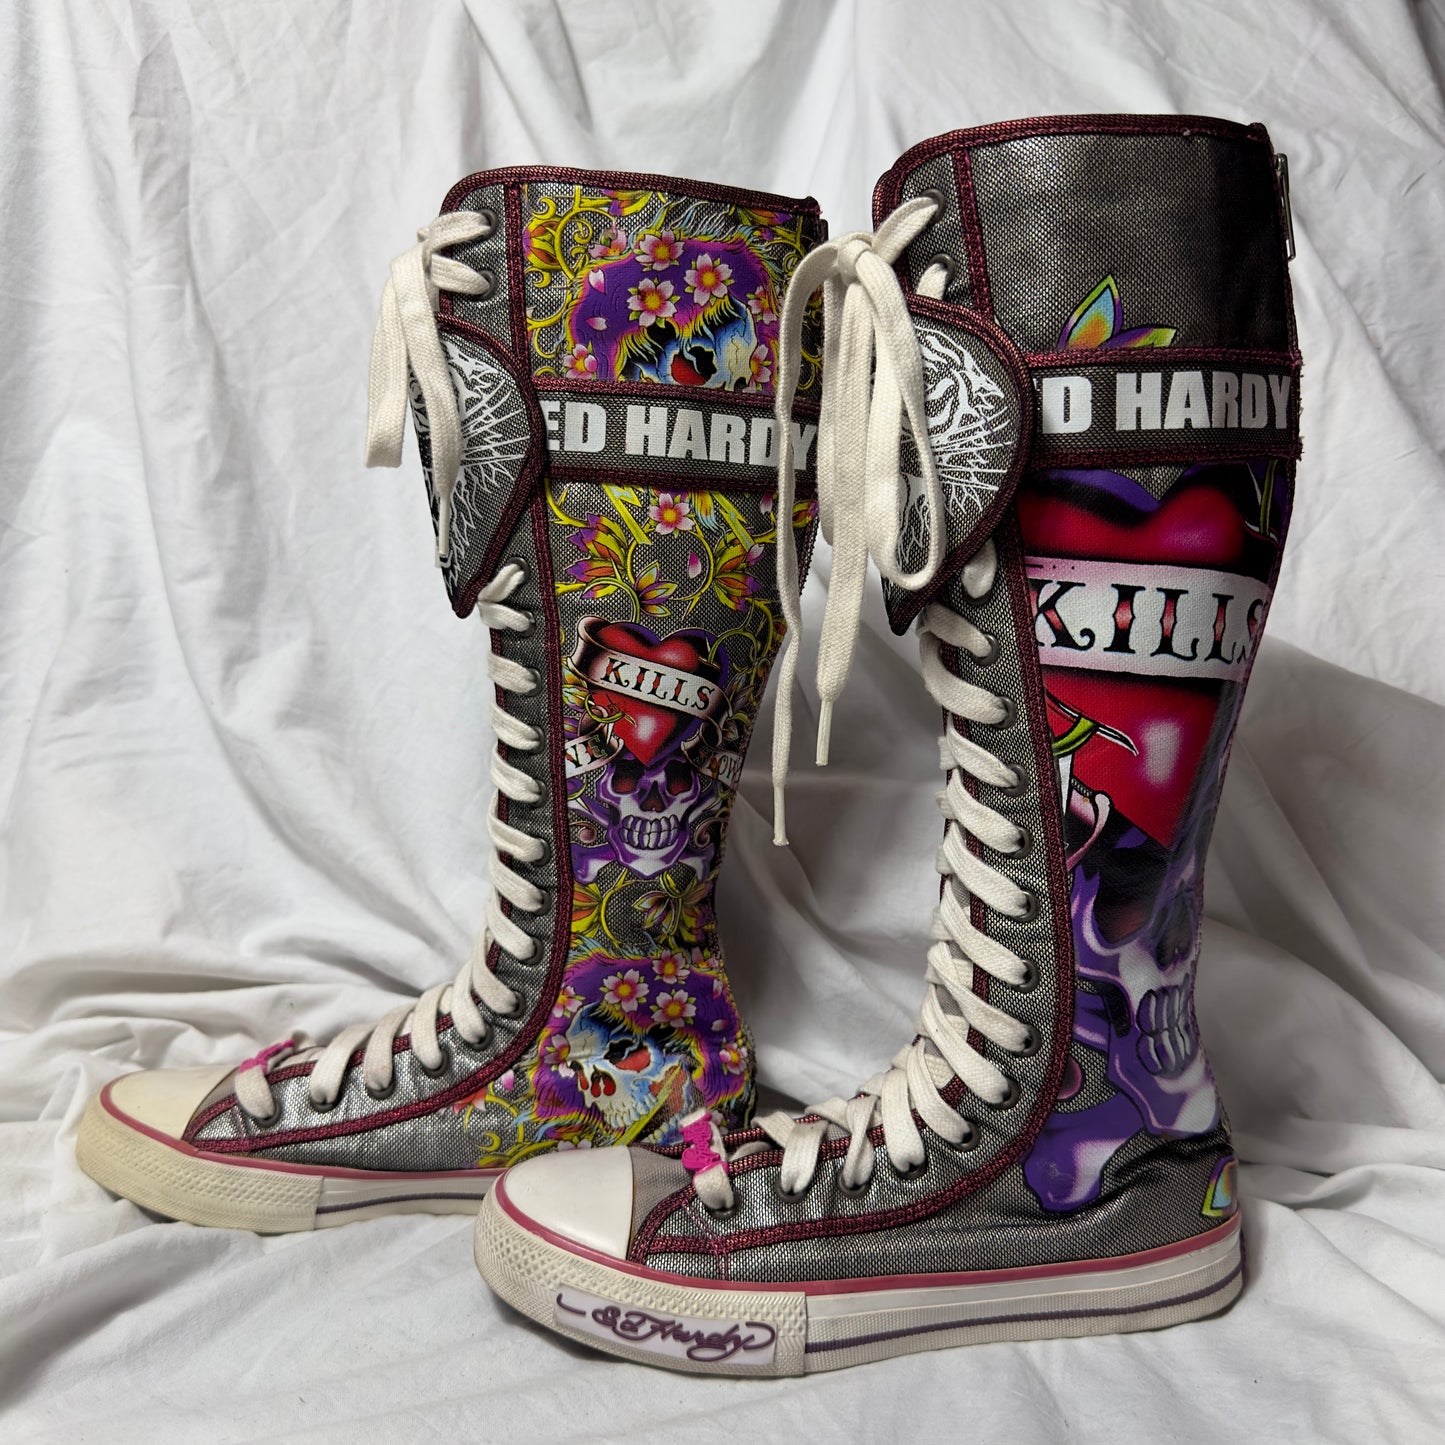 Ed Hardy 2000s Tattoos Lace Up Boxing Boots